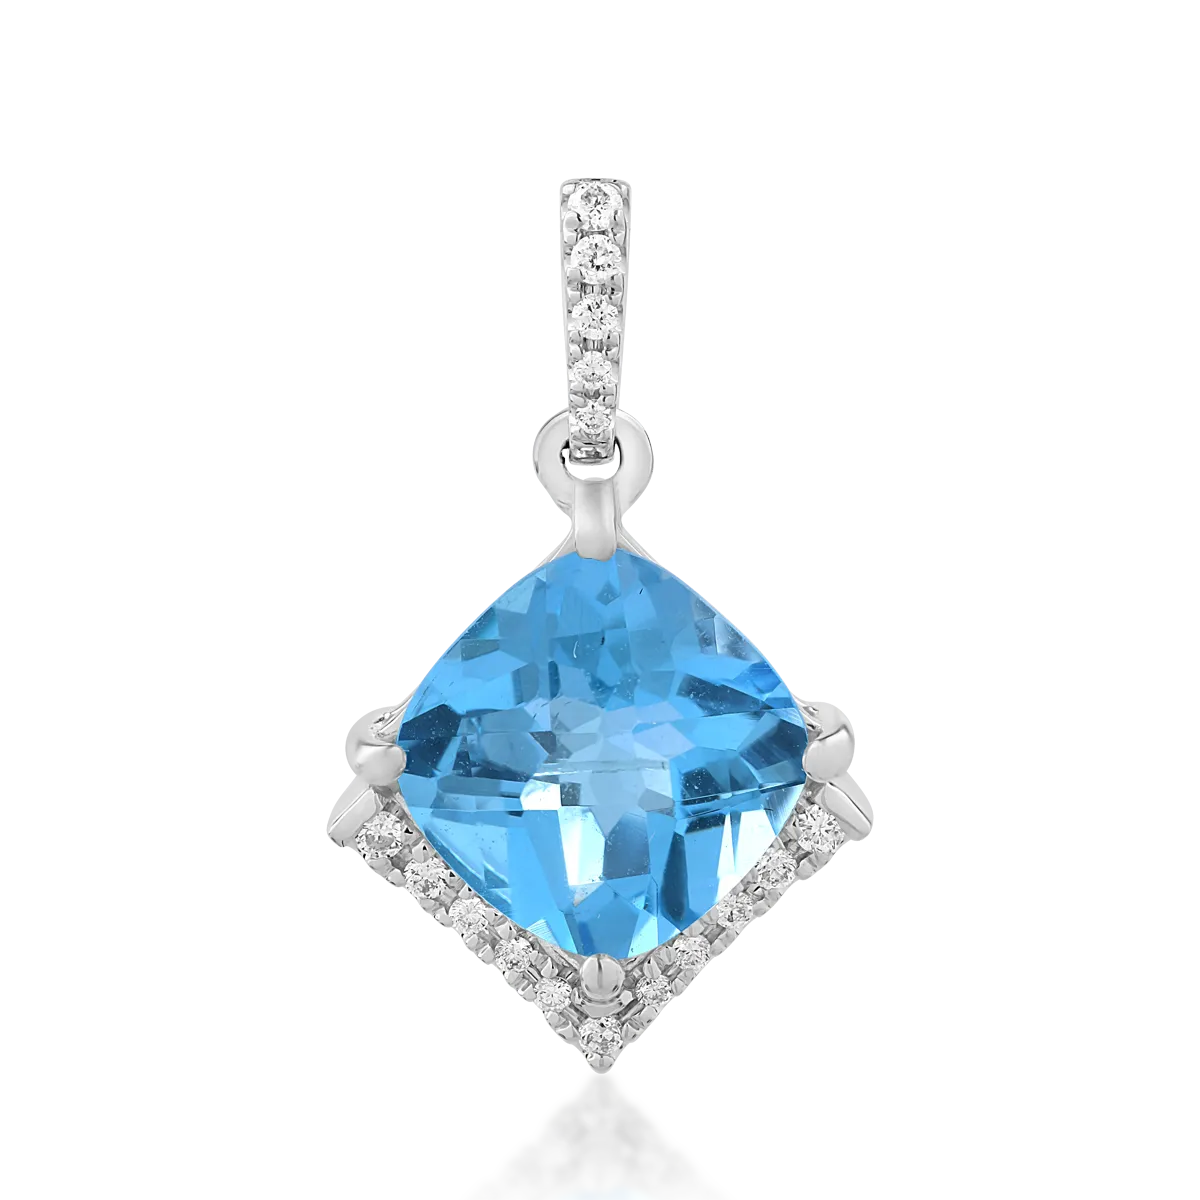 18K white gold pendant with 2.5ct blue topaz and 0.08ct diamonds